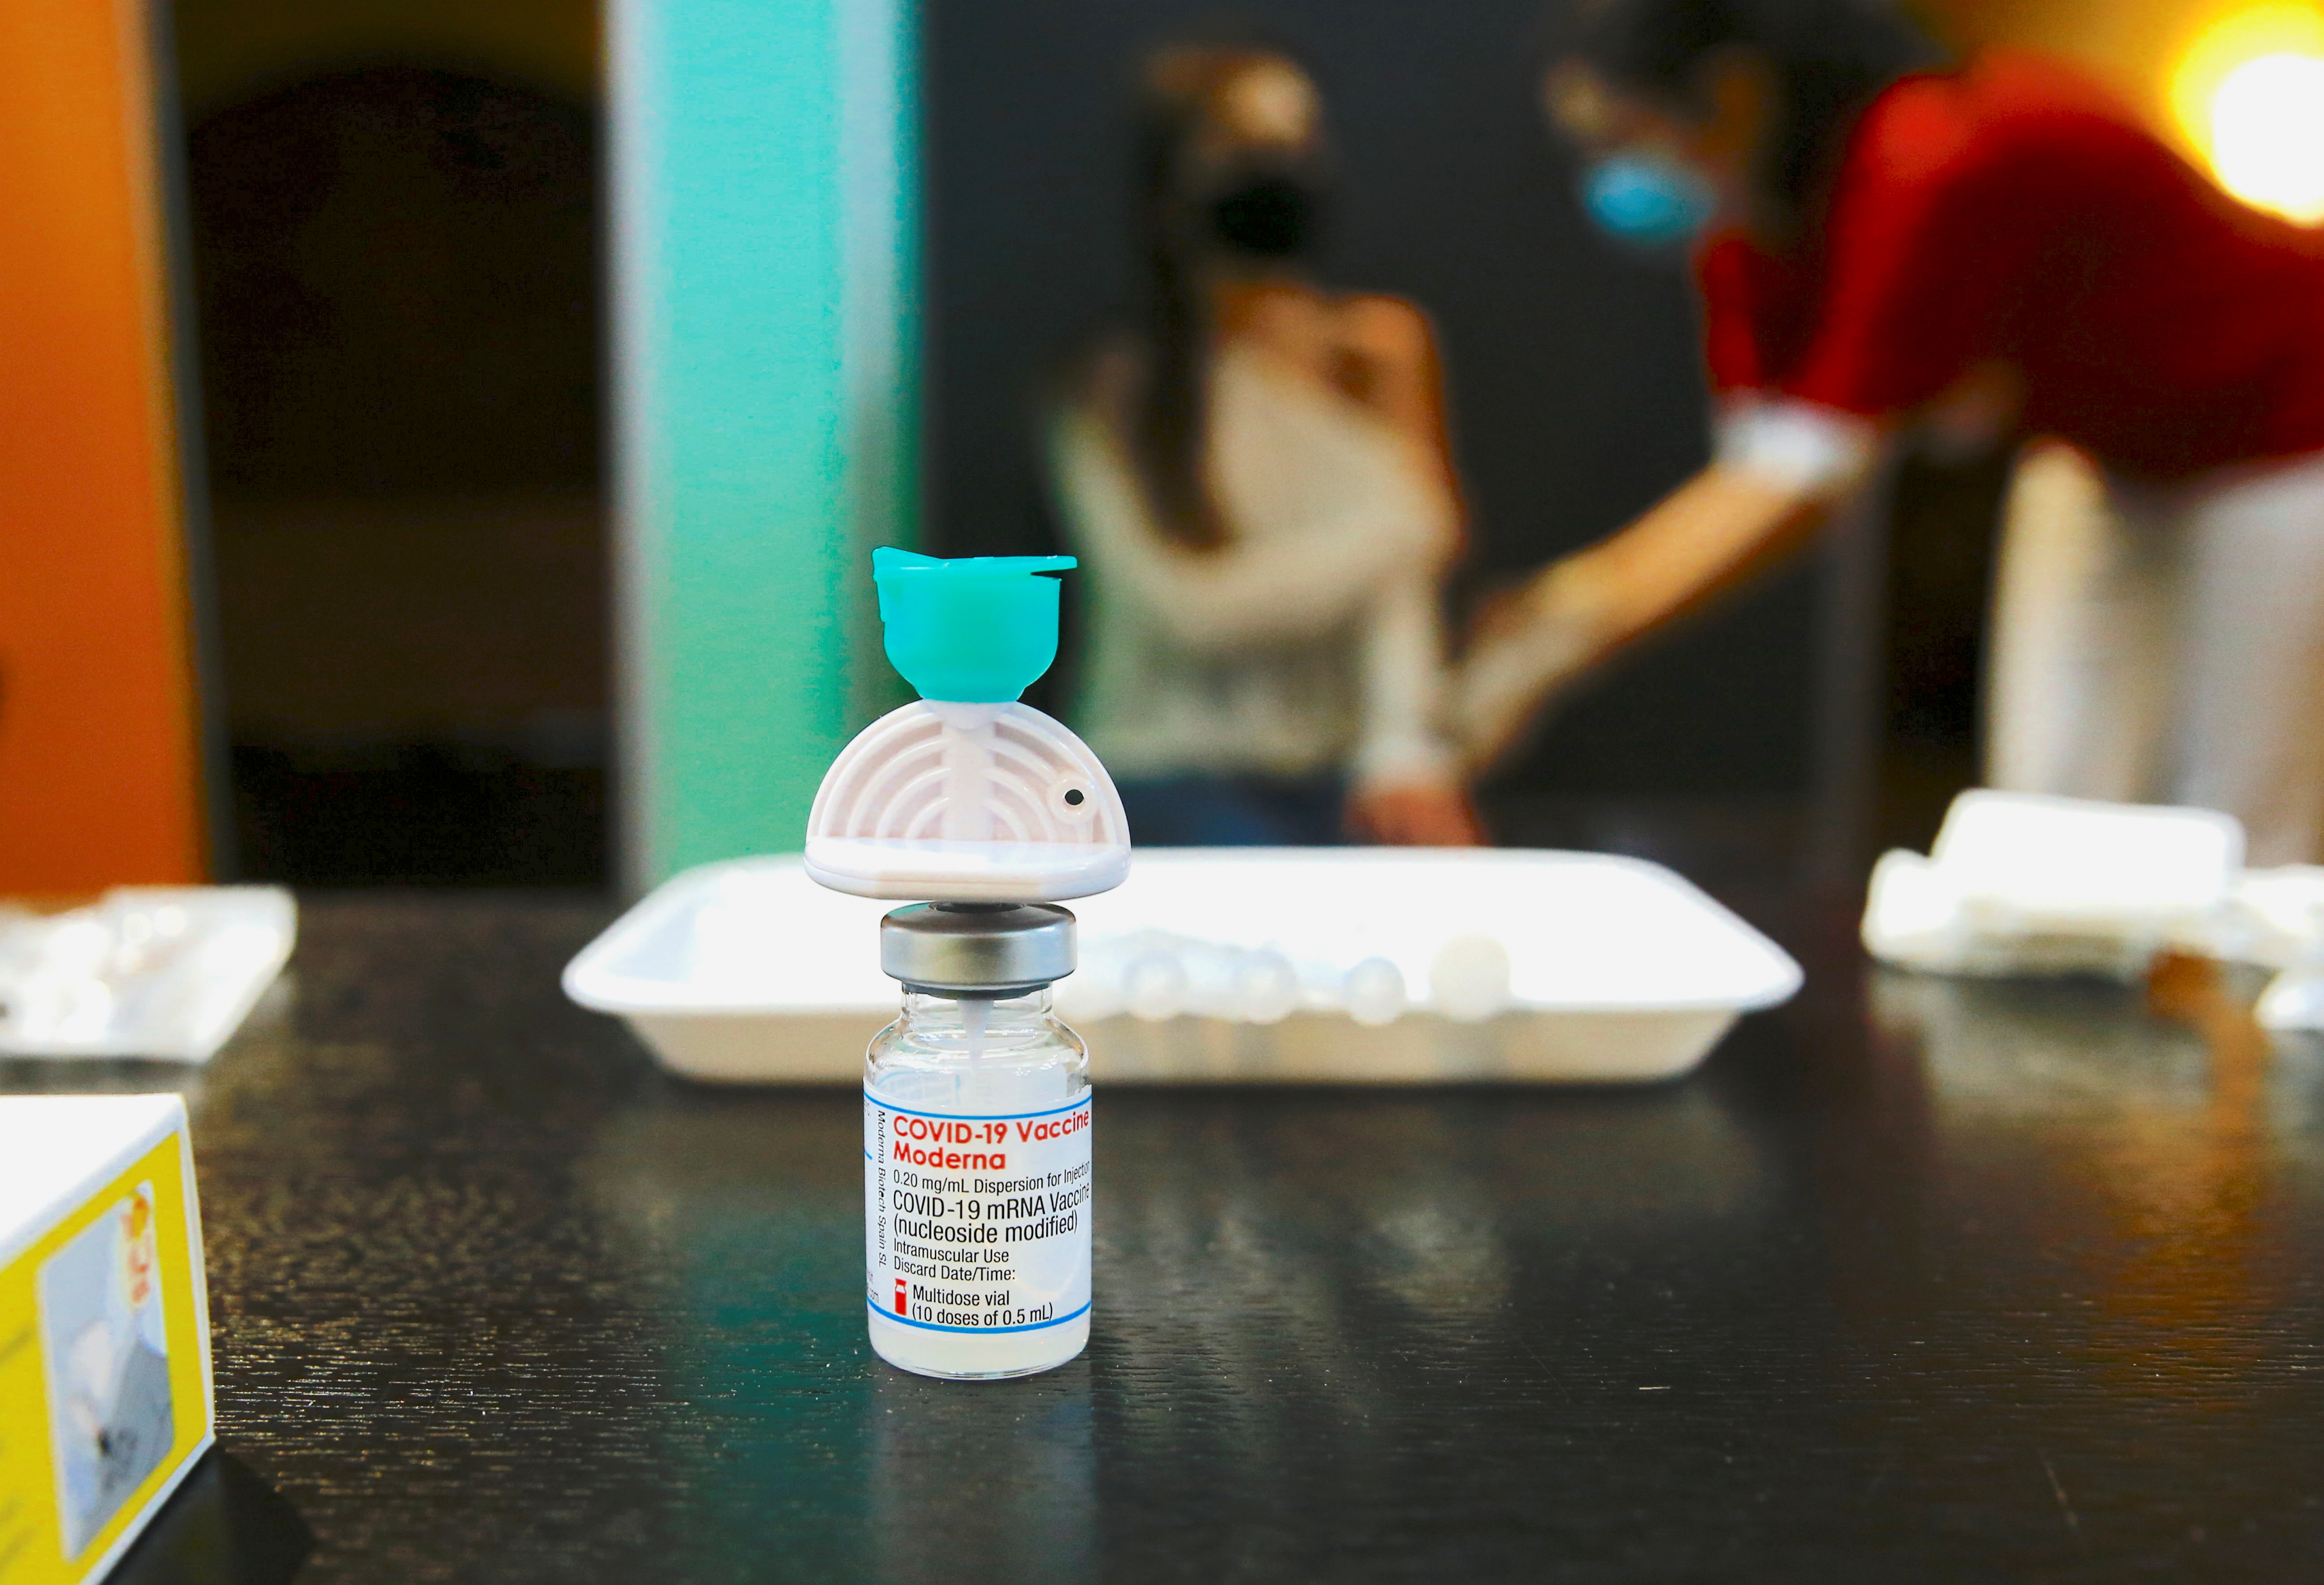 A vial containing the Moderna COVID-19 vaccine is seen at a temporary vaccination center in the Offene St. Jakob Kirche church in Zurich